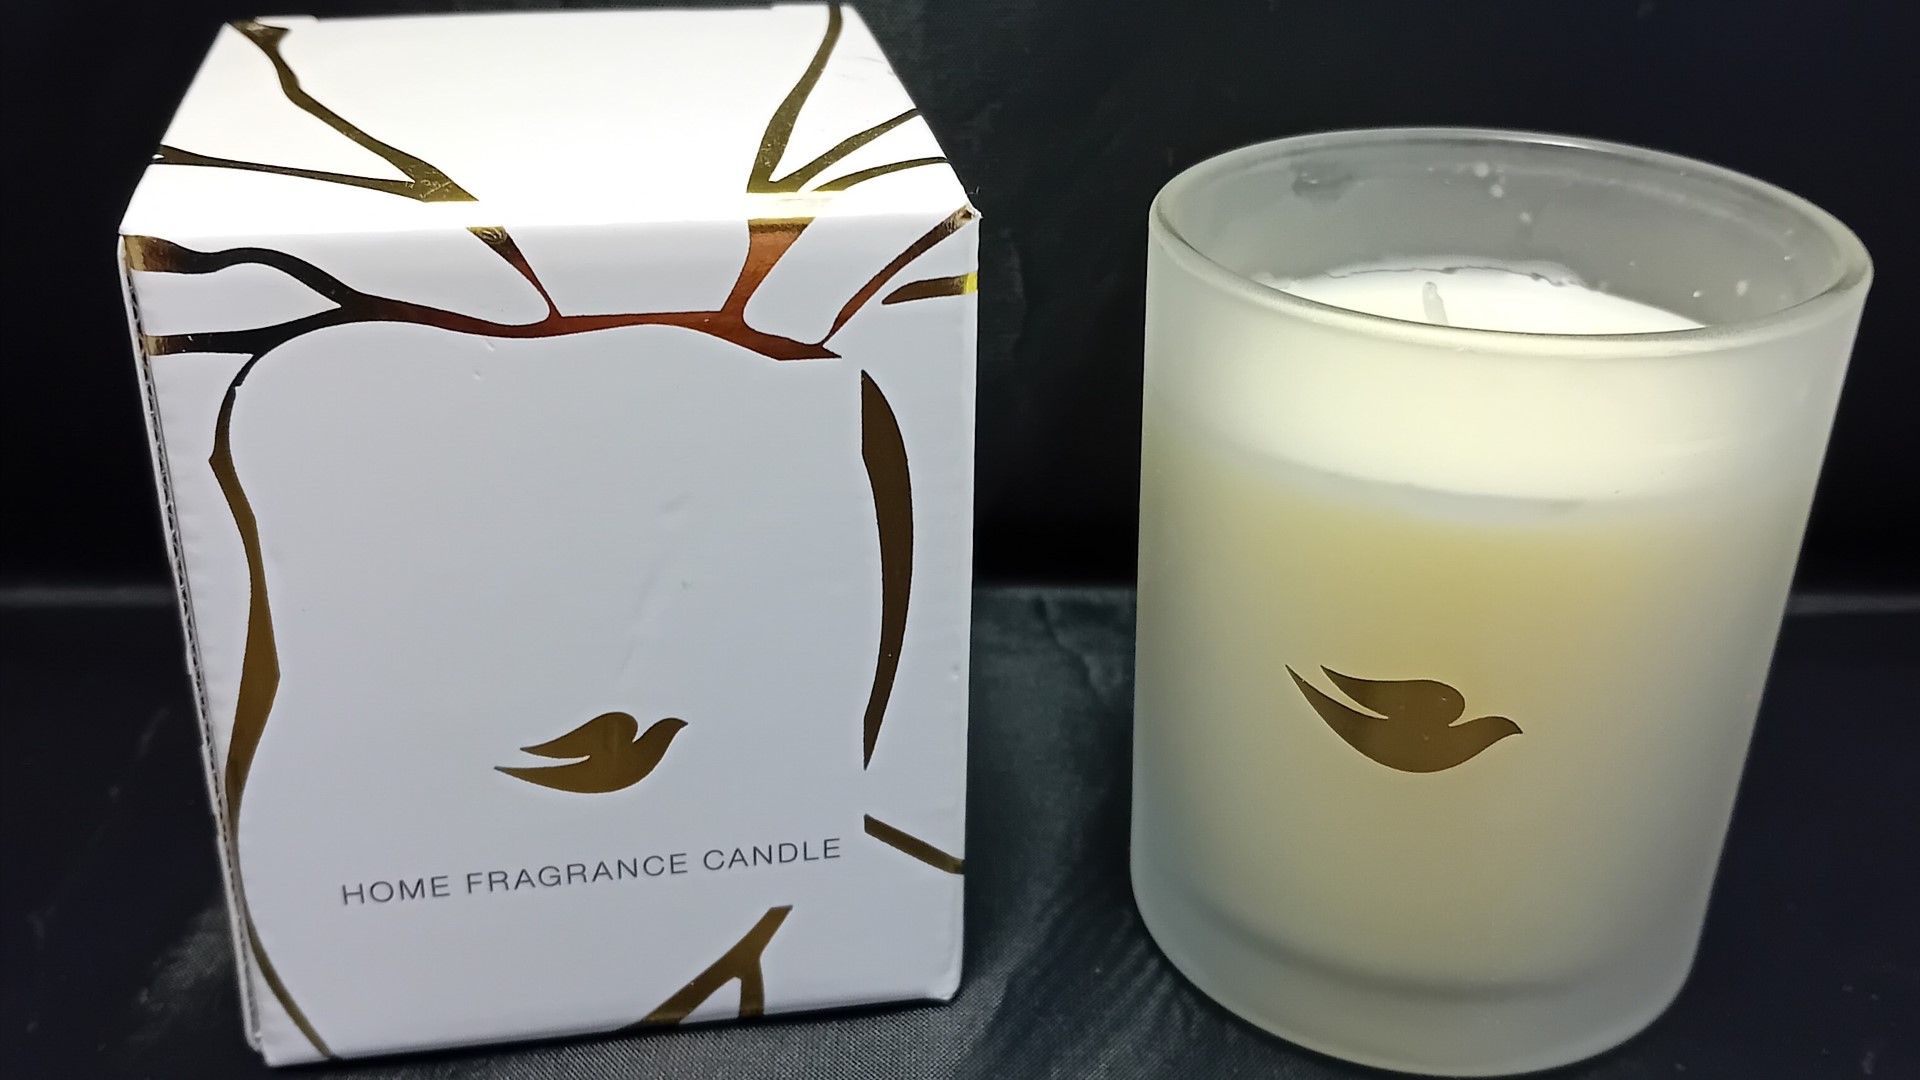 100g Fragrance Candle from Dove